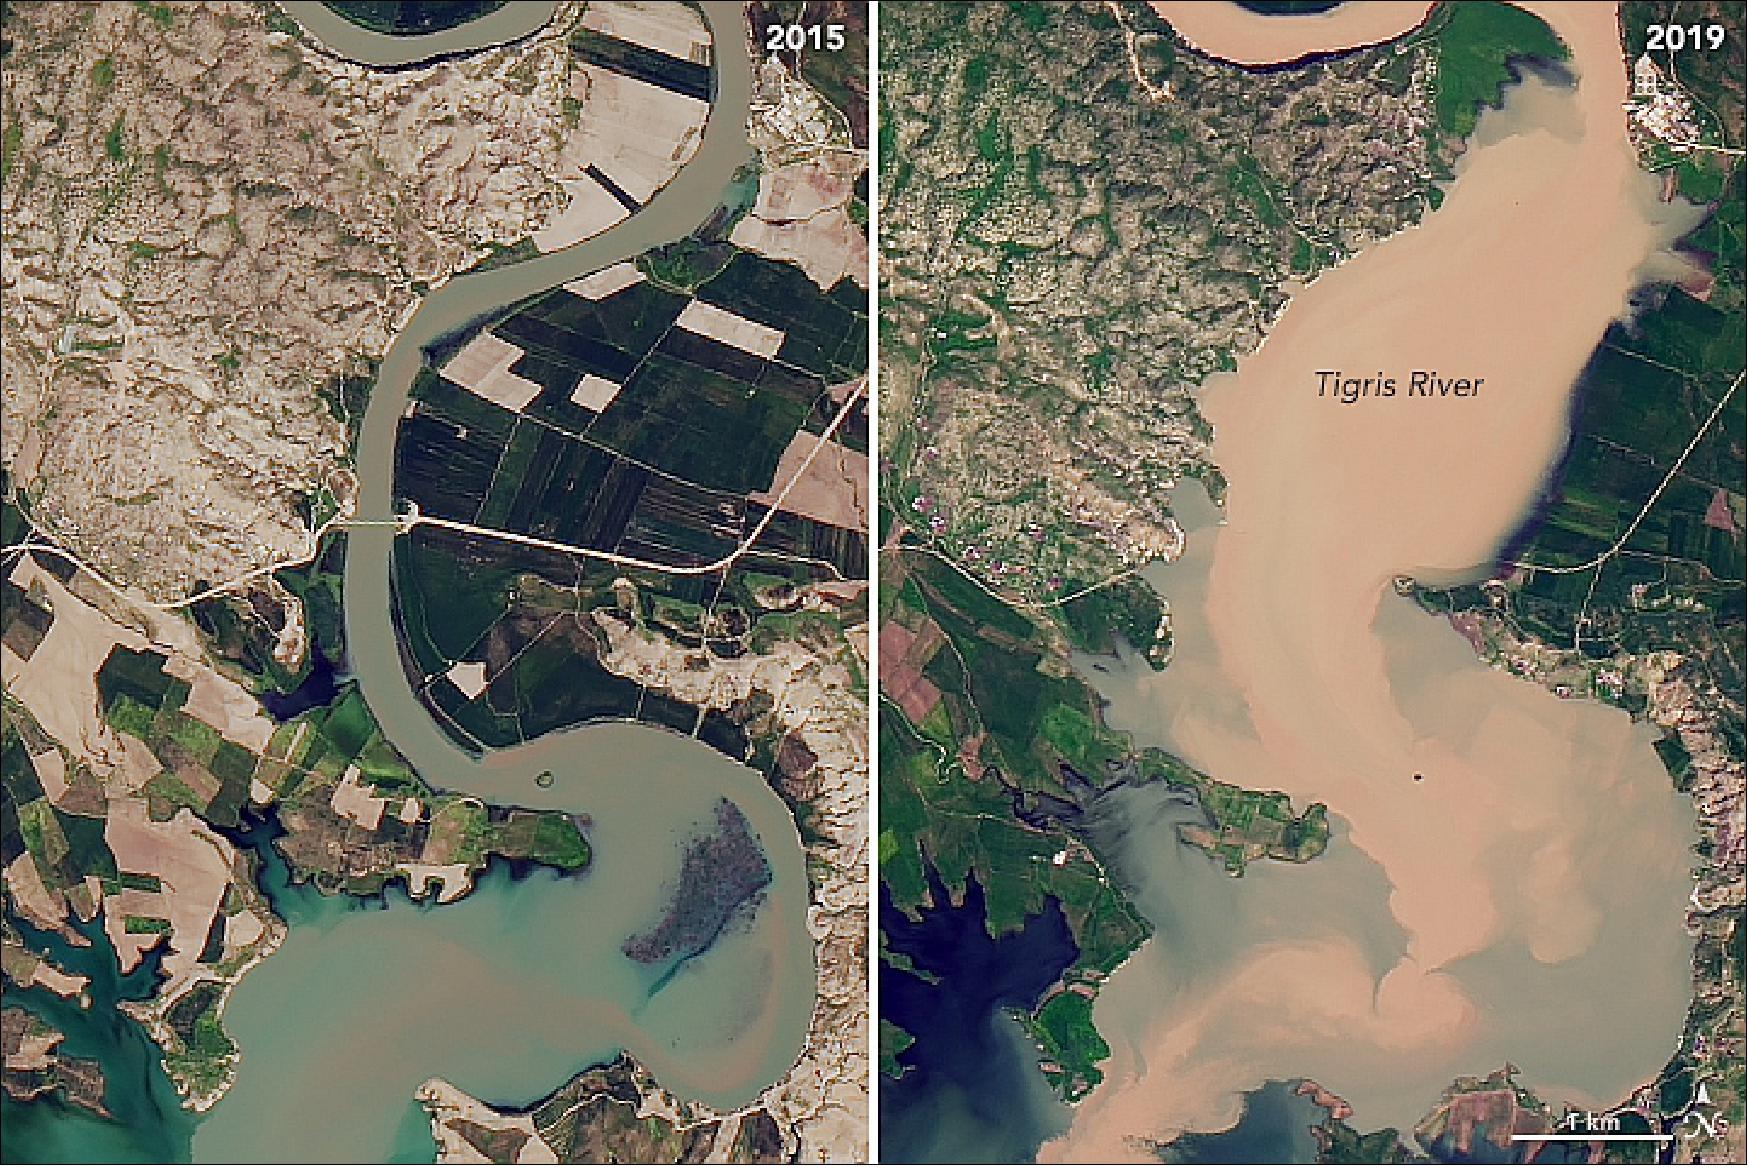 Figure 82: The Operational Land Imager (OLI) on Landsat 8 acquired images of the reservoir in April 2015 and April 2019. Beyond the water levels, notice how much greener the land surface was in 2019. Note also how much suspended sediment flowed into the northern end of the reservoir through the Tigris River [image credit: NASA Earth Observatory images by Joshua Stevens, using Landsat data from the U.S. Geological Survey, Story by Adam Voiland, with information and factchecking from Charon Birkett (University of Maryland), William Empson (U.S. Army), and William Baker (USDA FAS)]